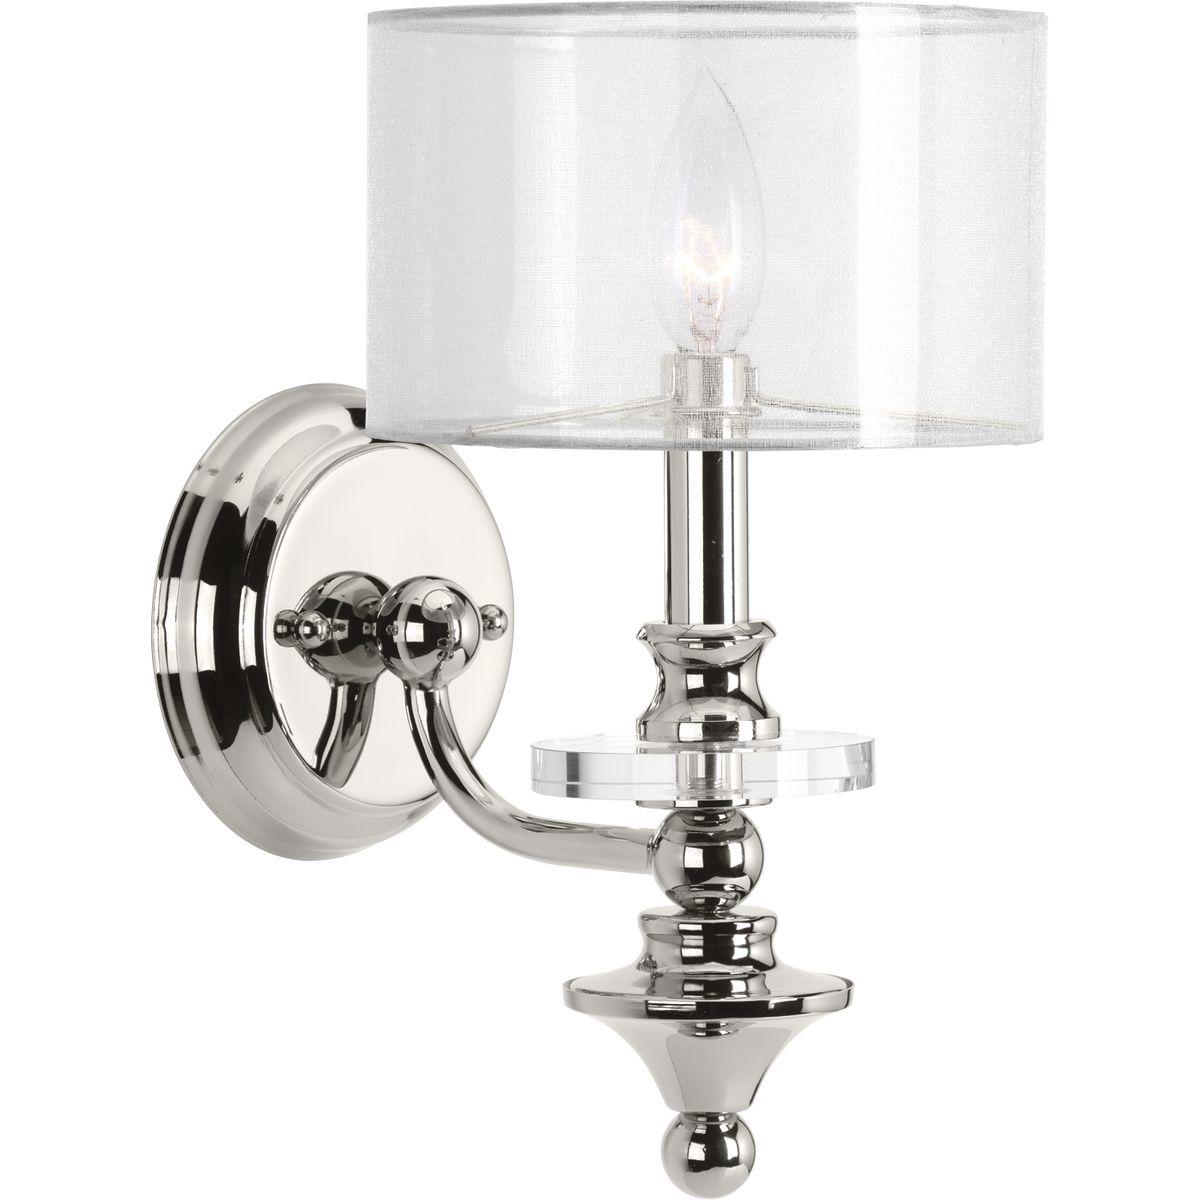 Hubbell P710013-104 Marche is an eclectic arrangement of gleaming metal turnings, which recreates the vintage styles found in Parisian neighborhood markets. Polished Nickel elements are combined with a luxurious sheer silver organza shade and clear K9 glass elements. The one